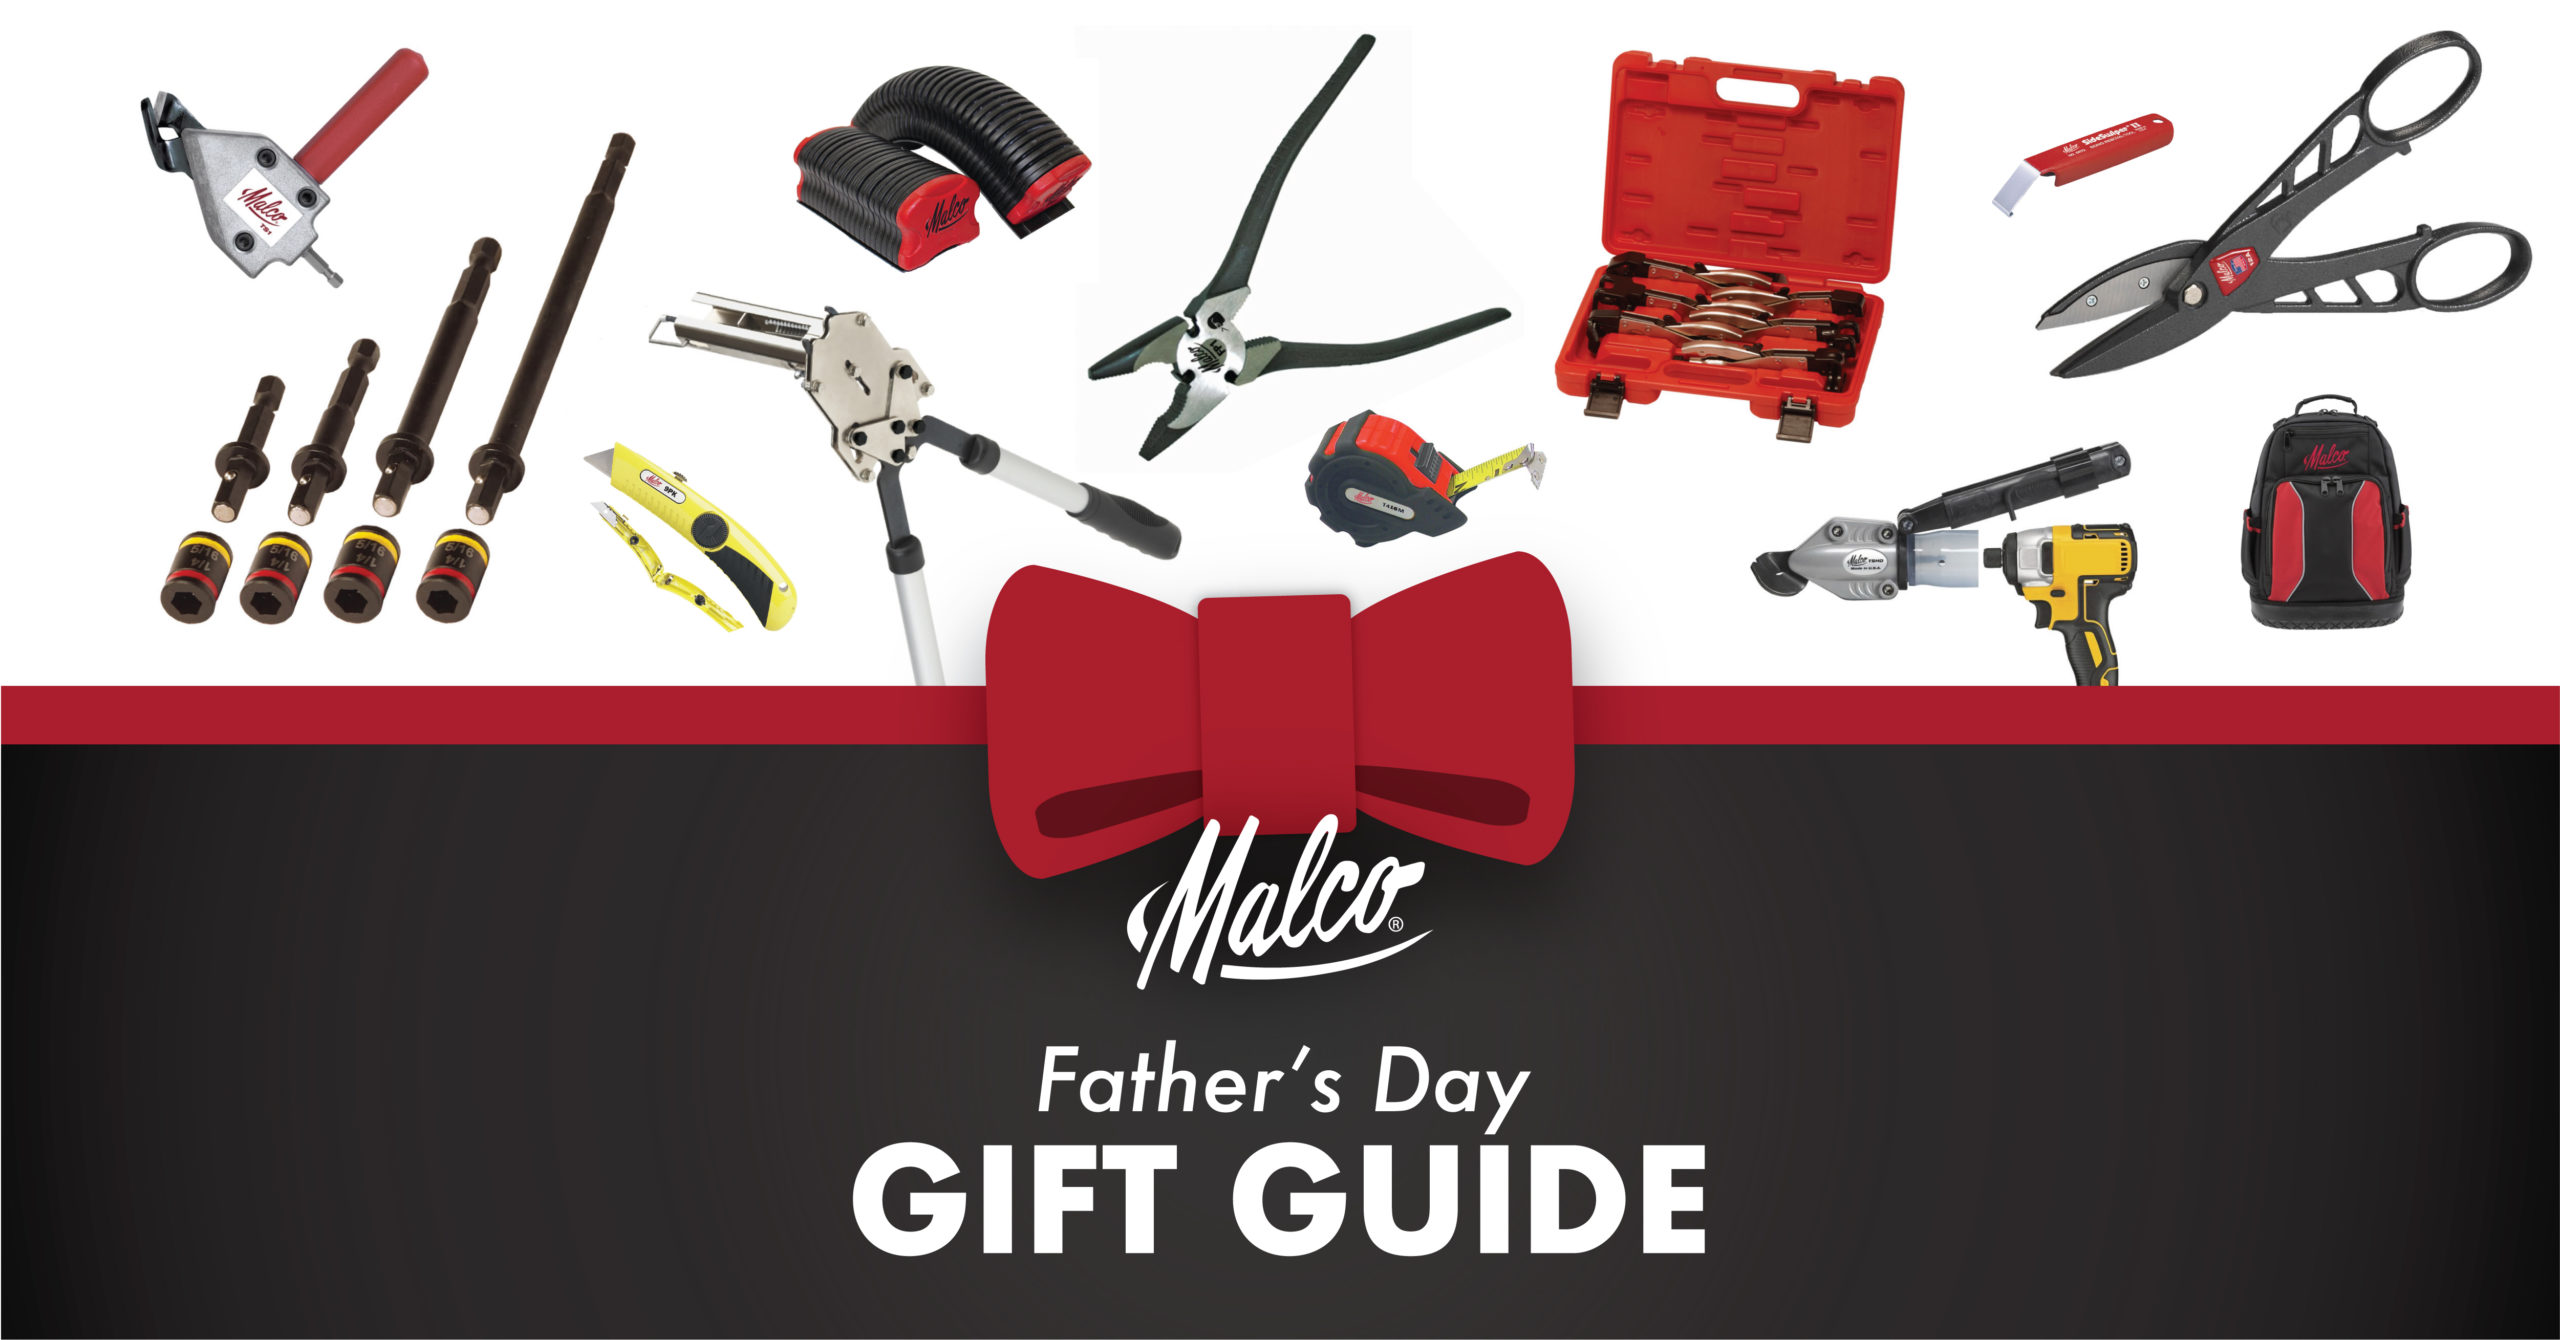 Malco Father's Day Gift Guide